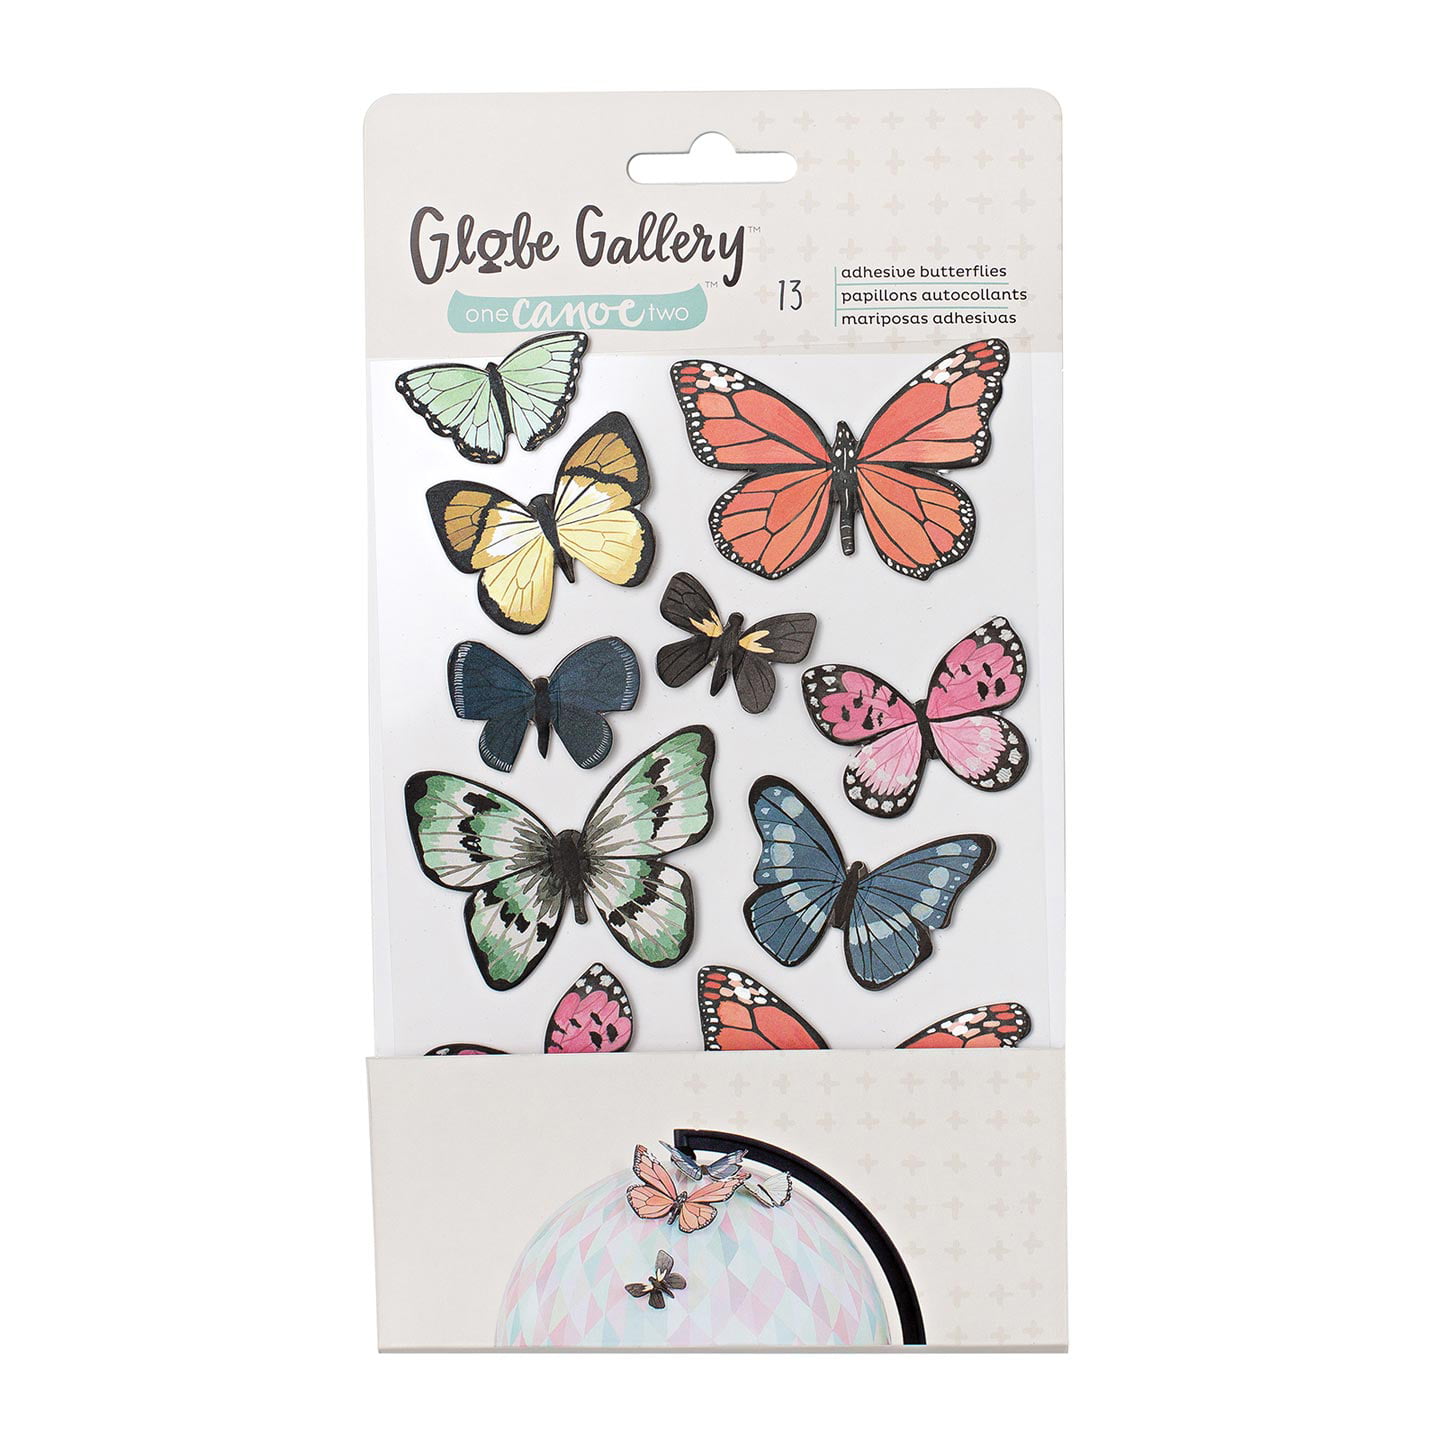 1canoe2 3D Butterfly Stickers: Assorted Sizes, 13 pack - Walmart.com